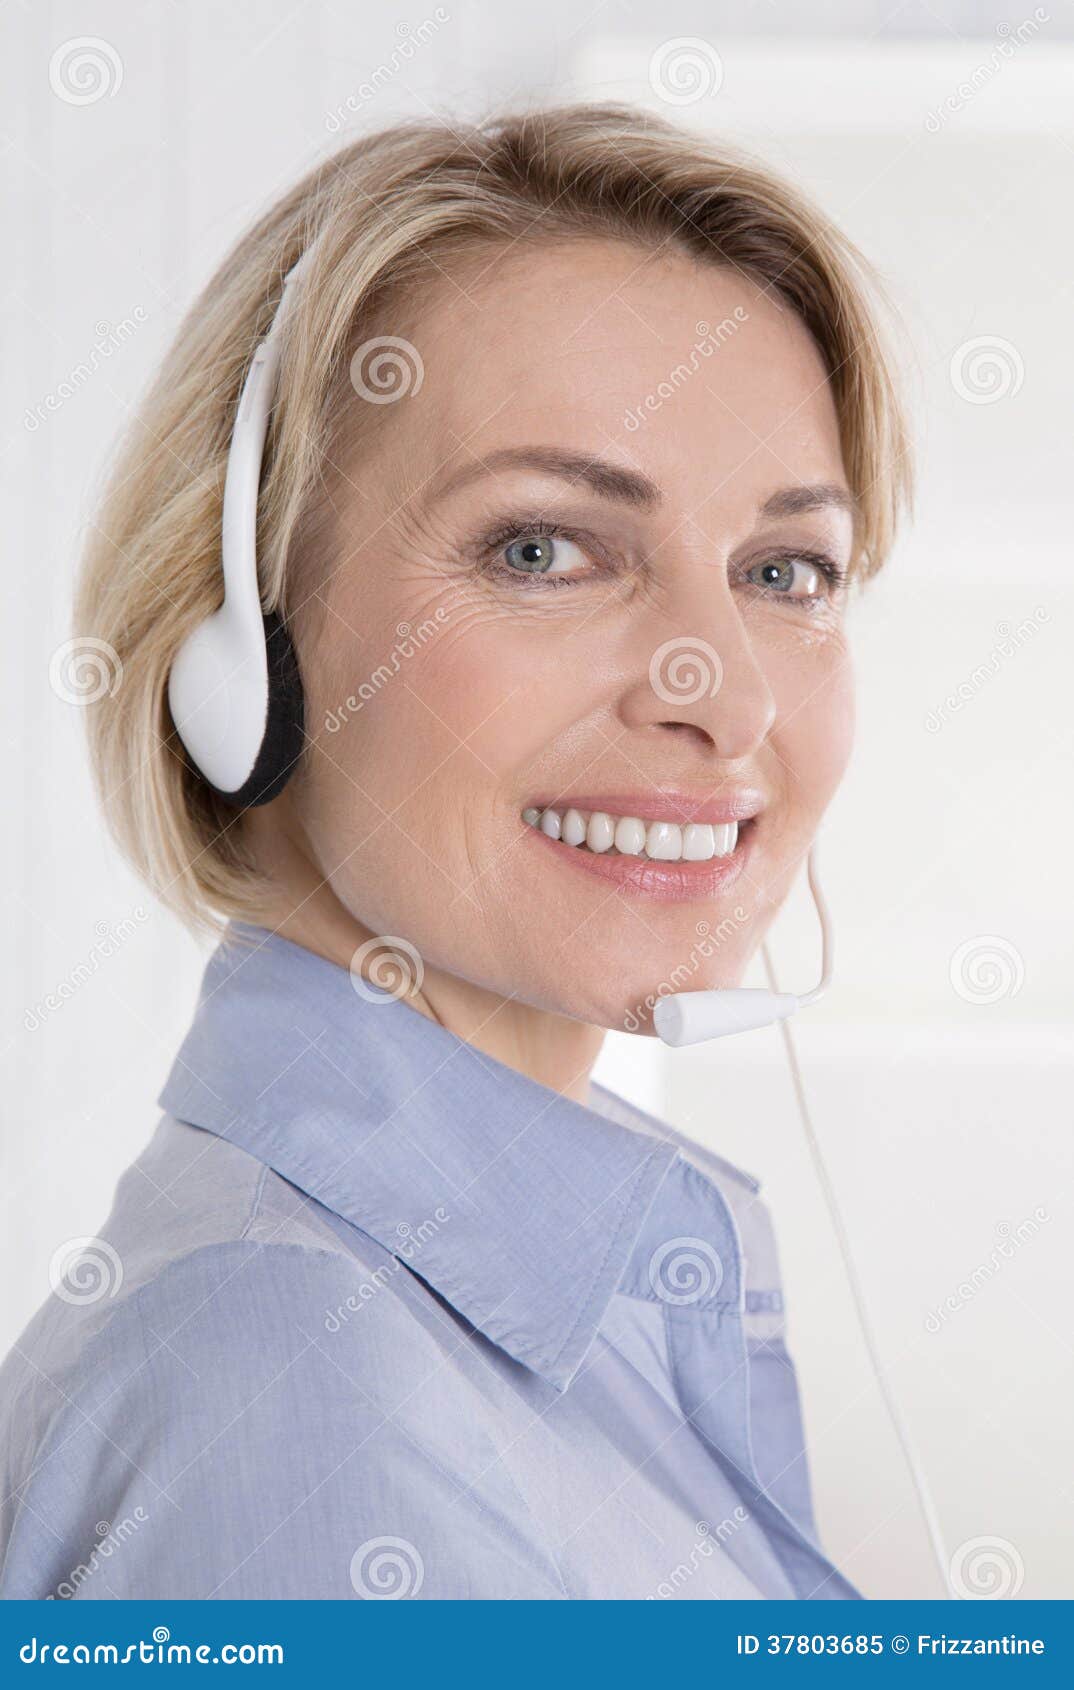 portrait of smiling woman with headphone on telesales.